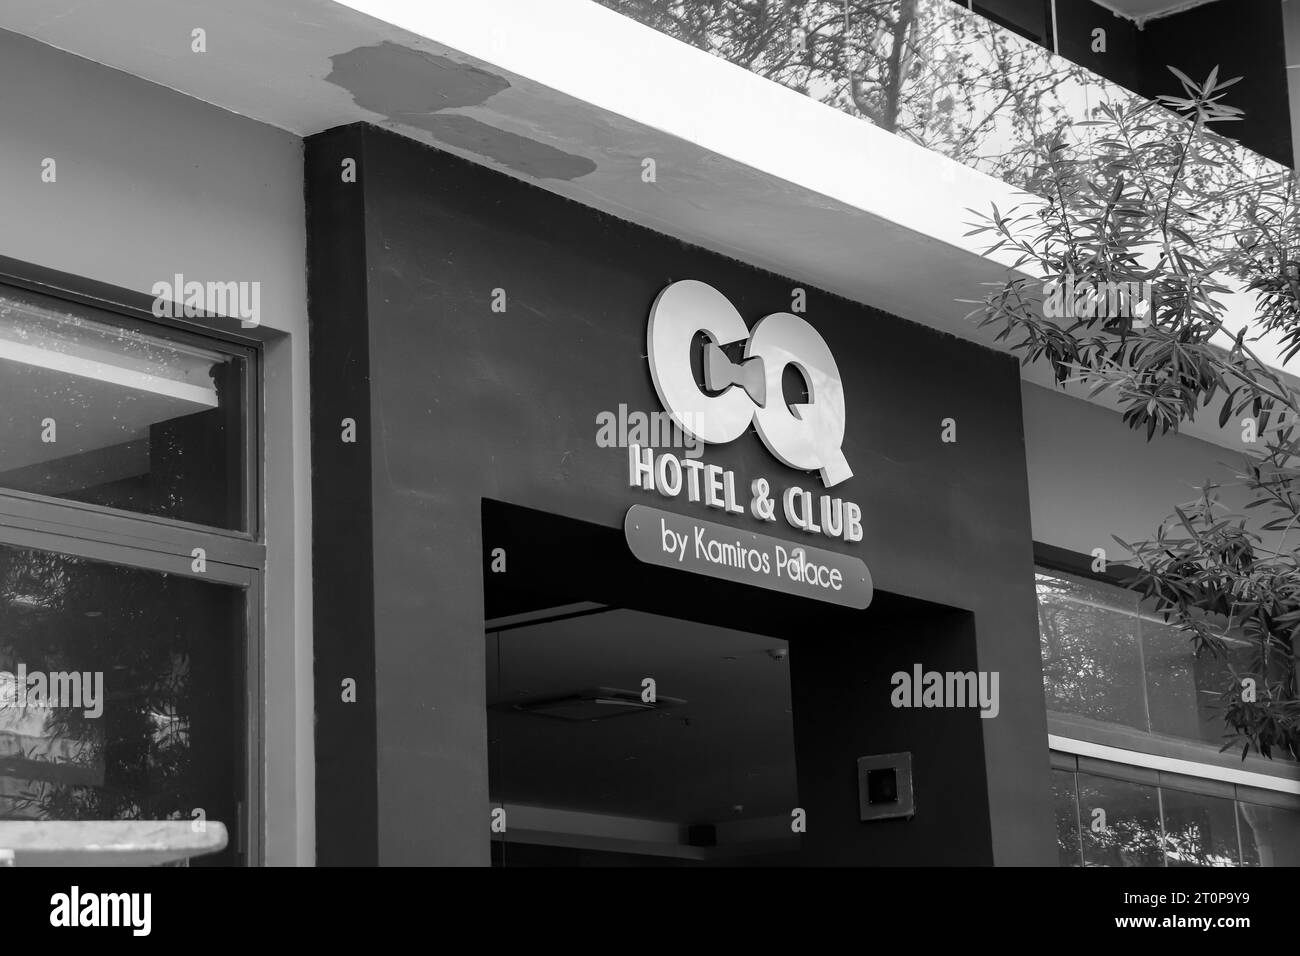 Hotel and Club, an adults only Rhodes city lodging accommodation front entrance in black and white Stock Photo